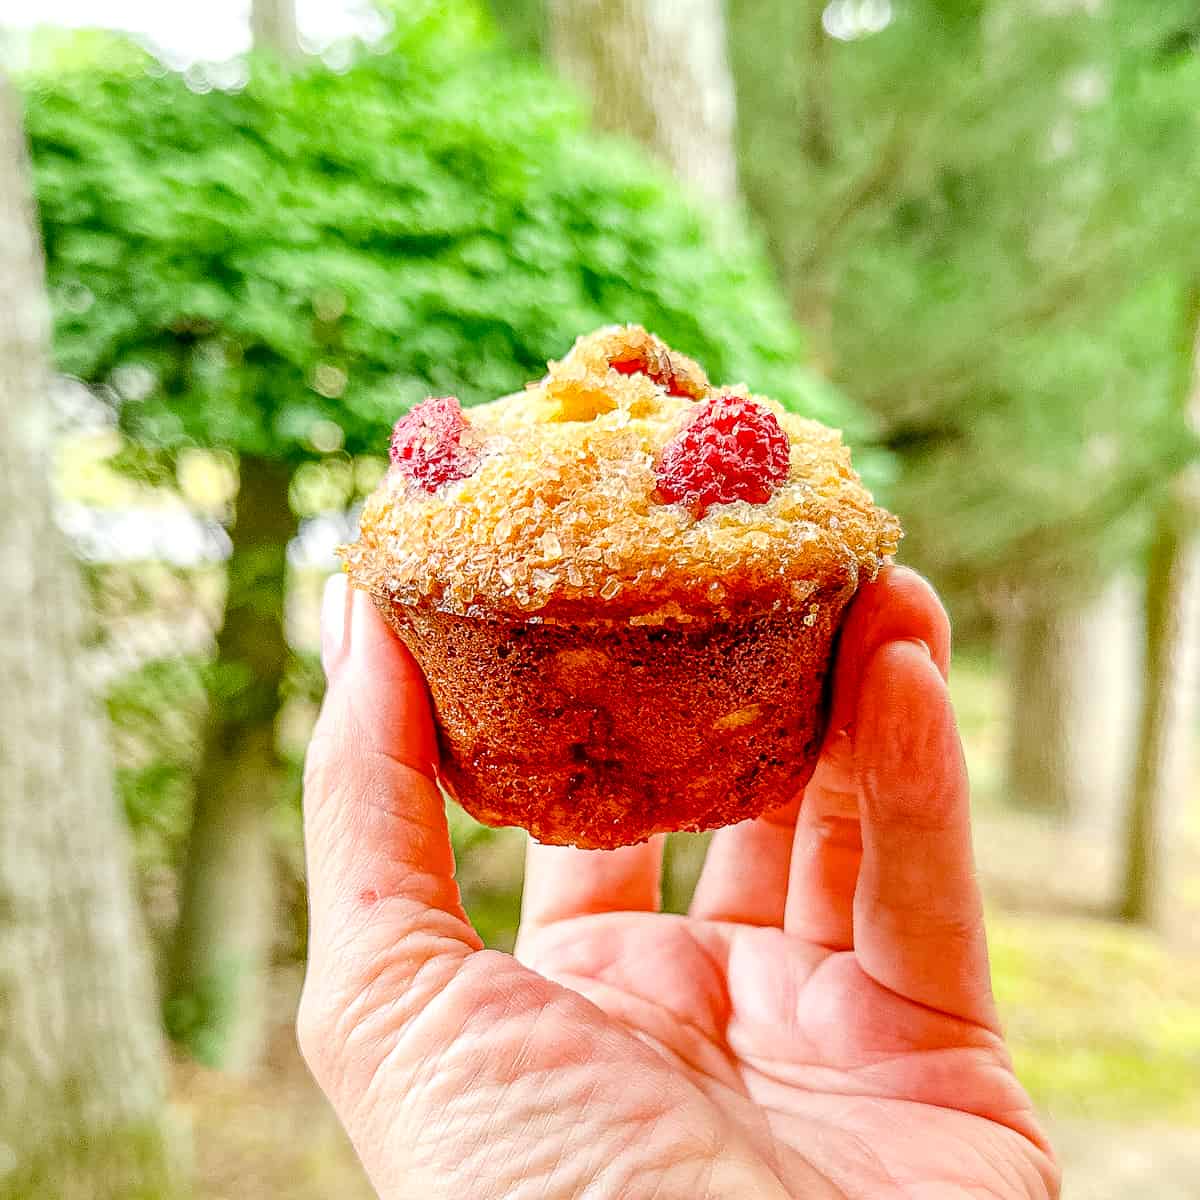 Holding a raspberry banana muffin in my hand in front of trees.